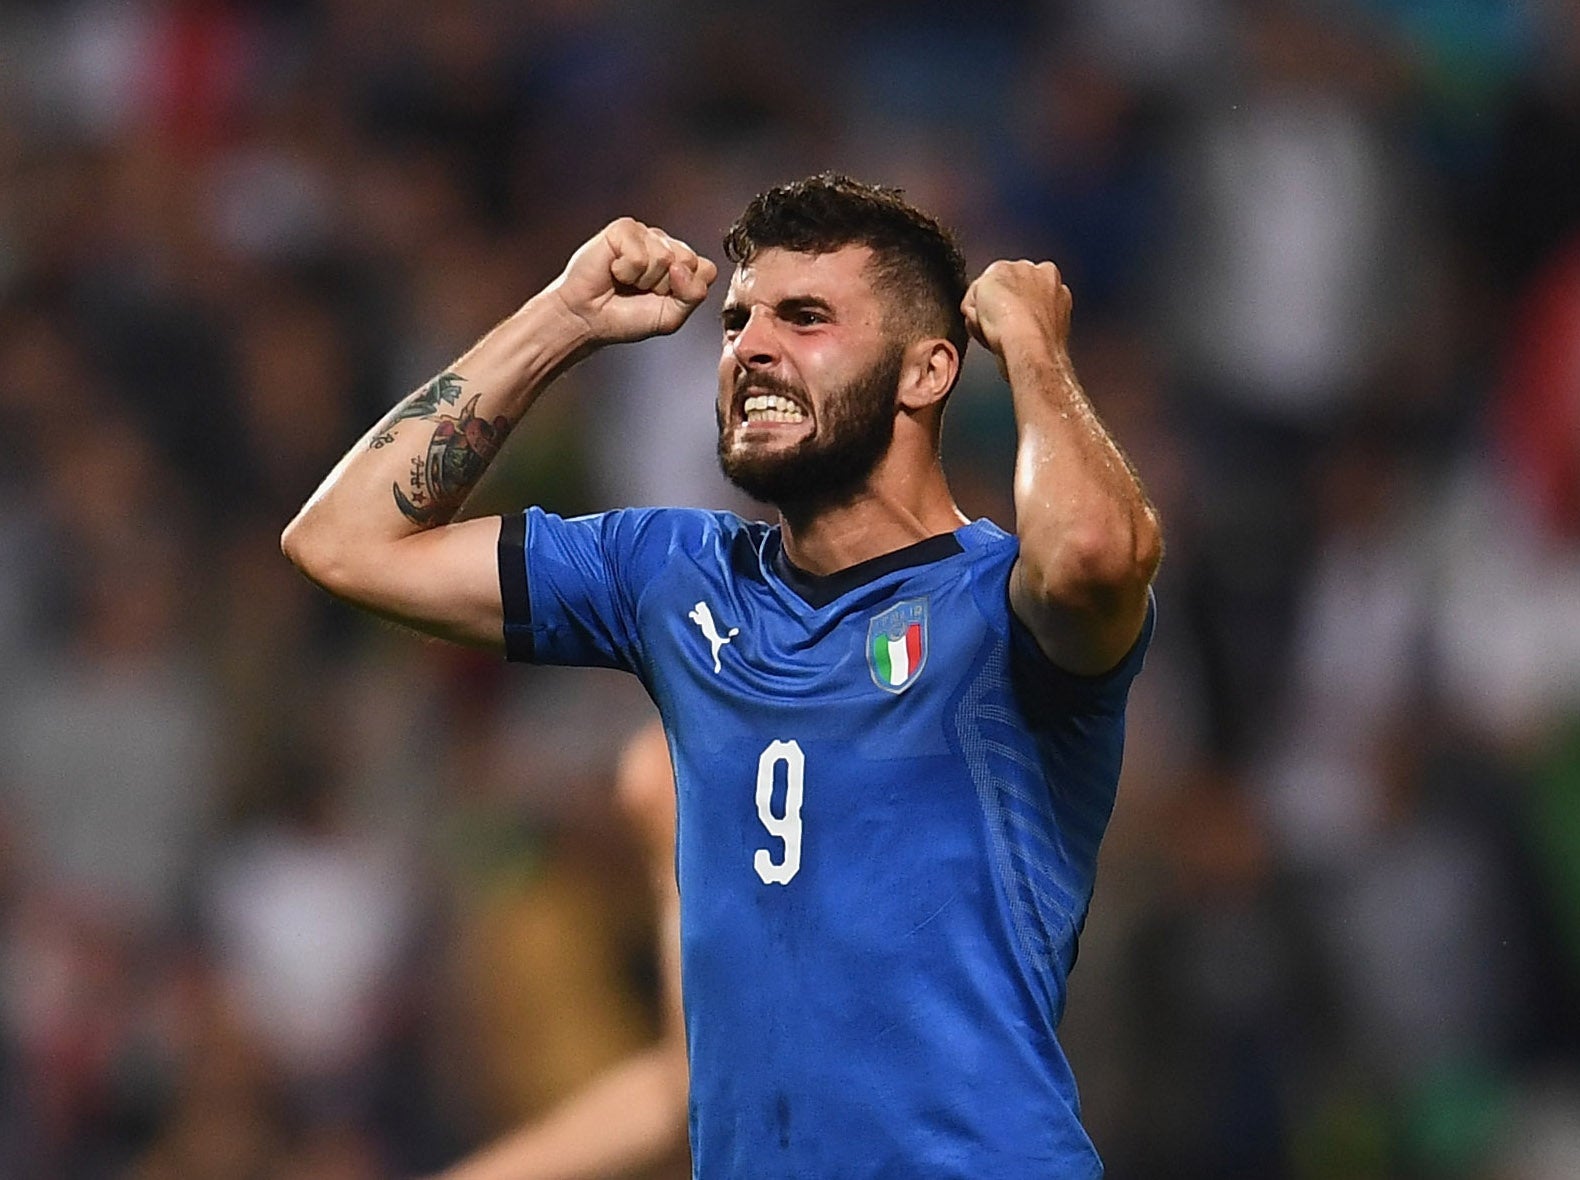 Wolves sign Italian starlet Patrick Cutrone from AC Milan on a four-year deal